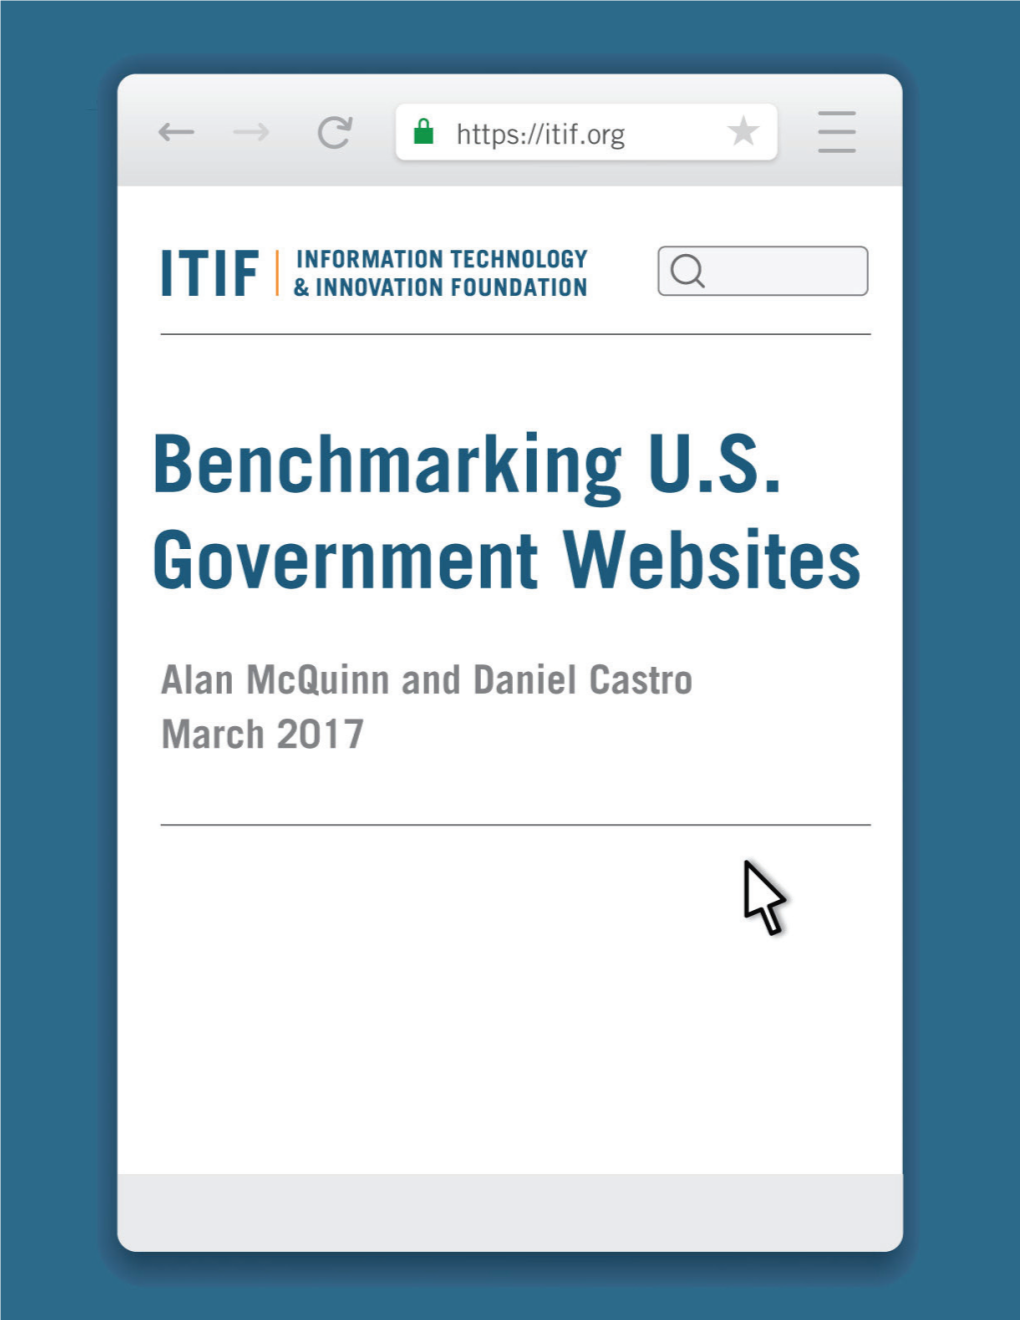 Benchmarking US Government Websites